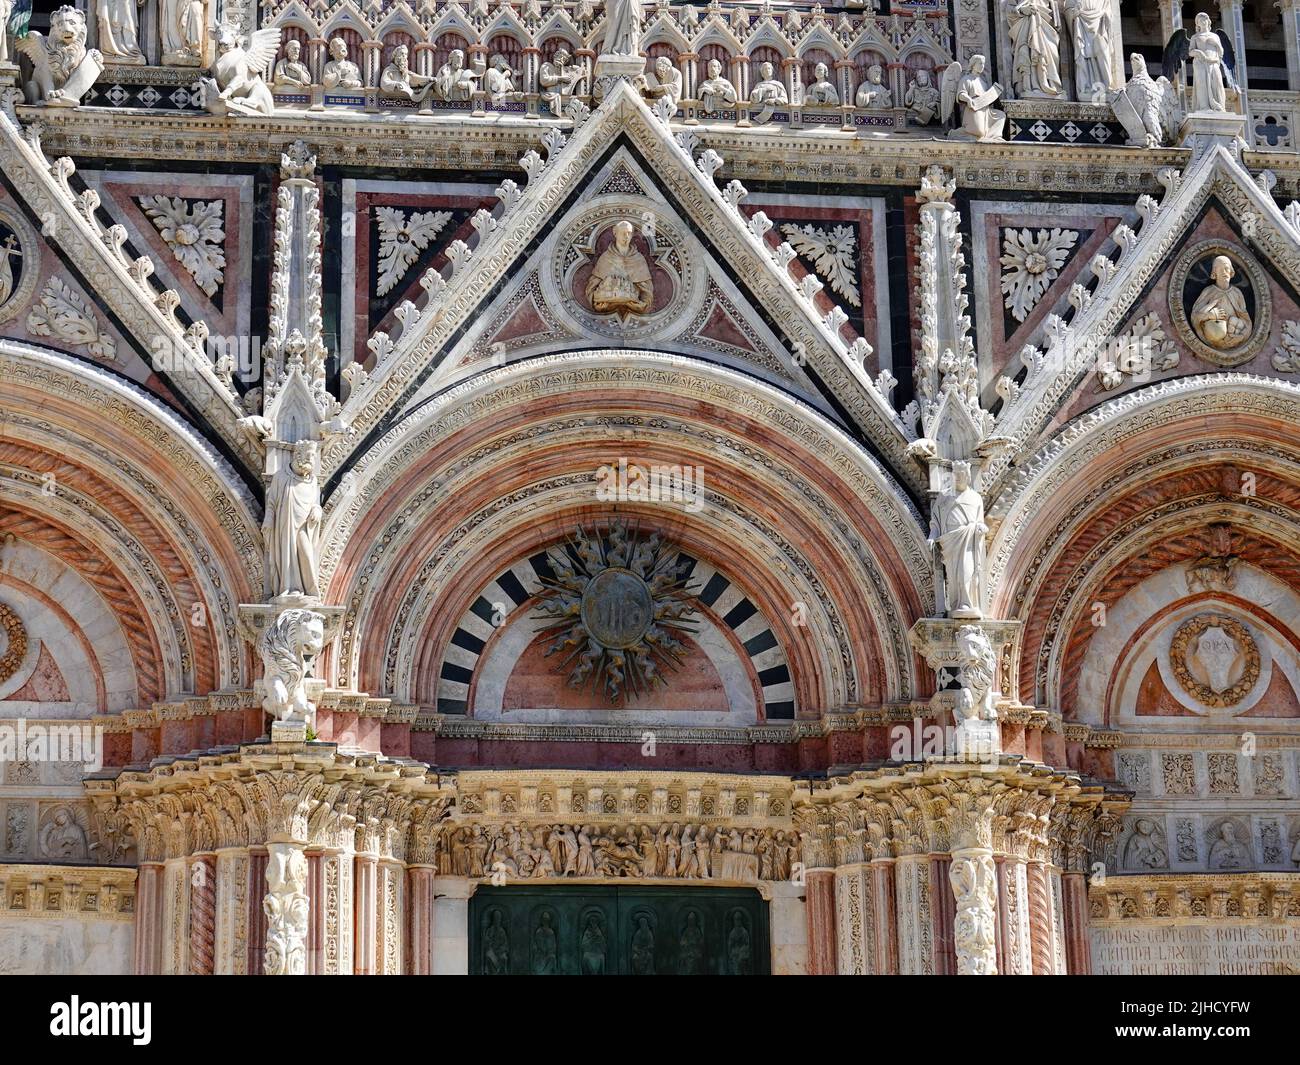 Exterior detail of the front facade, Duomo di Siena, historic cathedral in the heart of Tuscany, Italy. Stock Photo